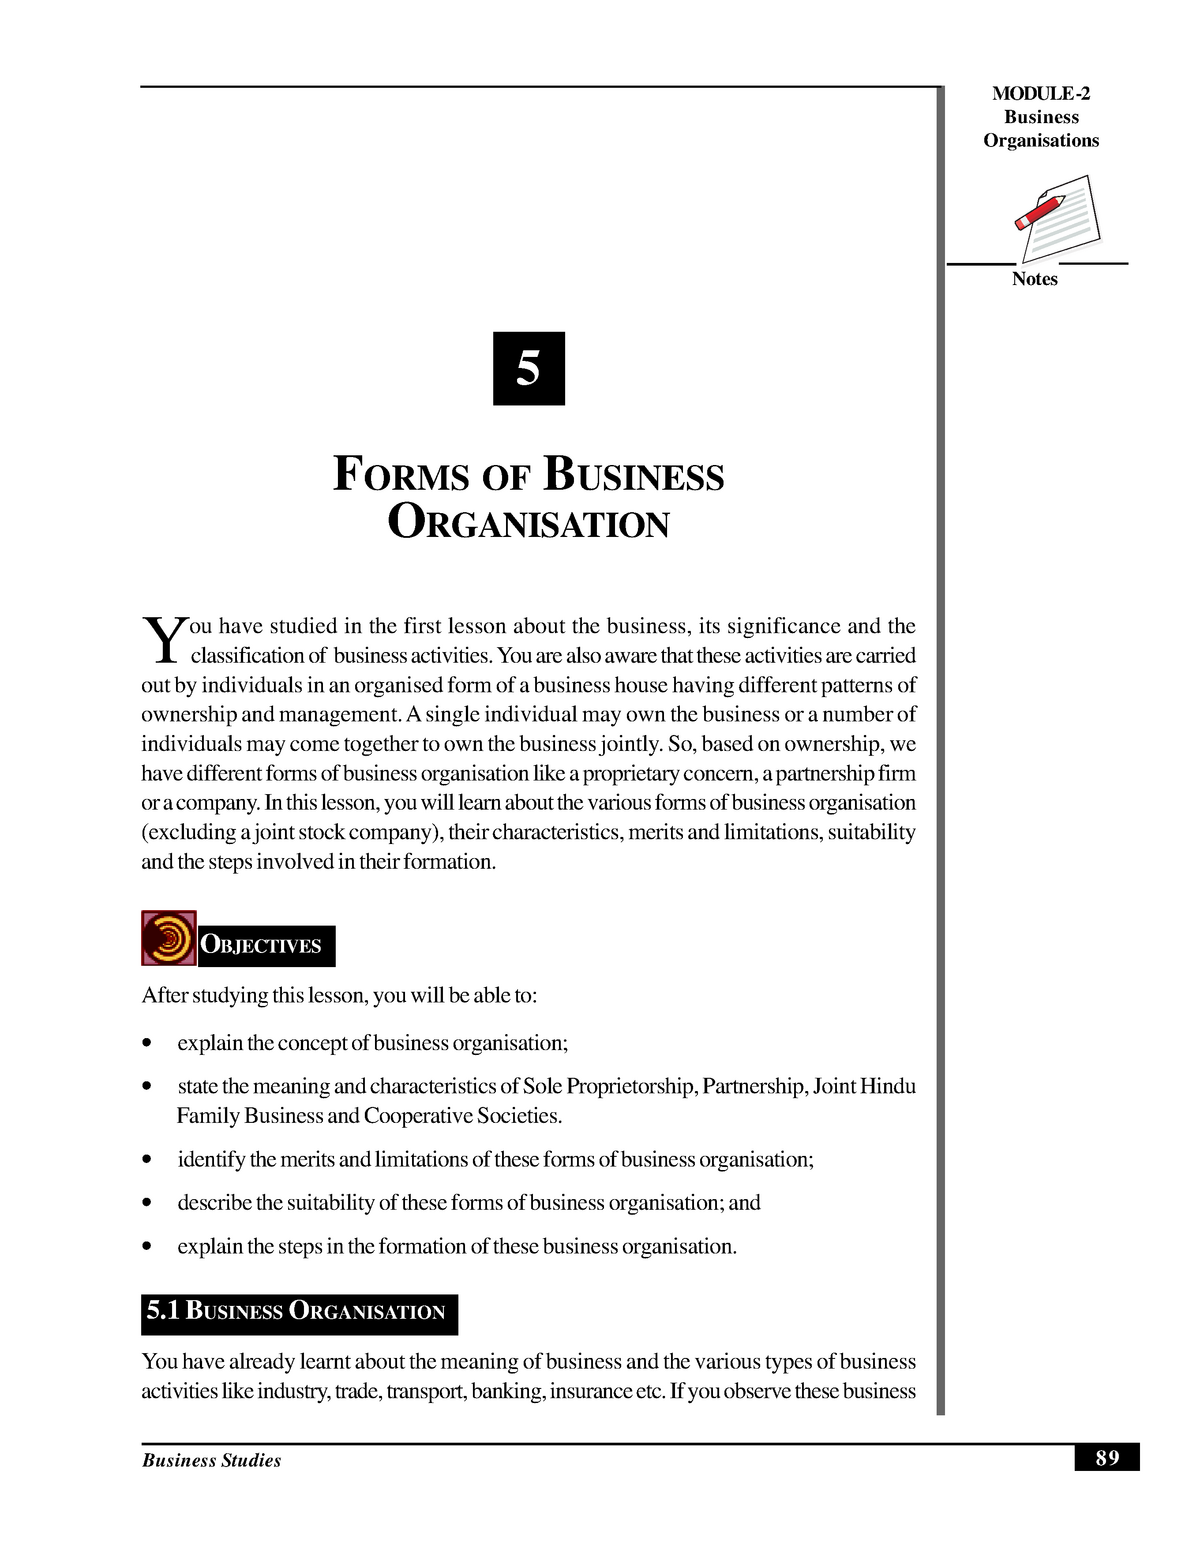 case studies of forms of business organisation